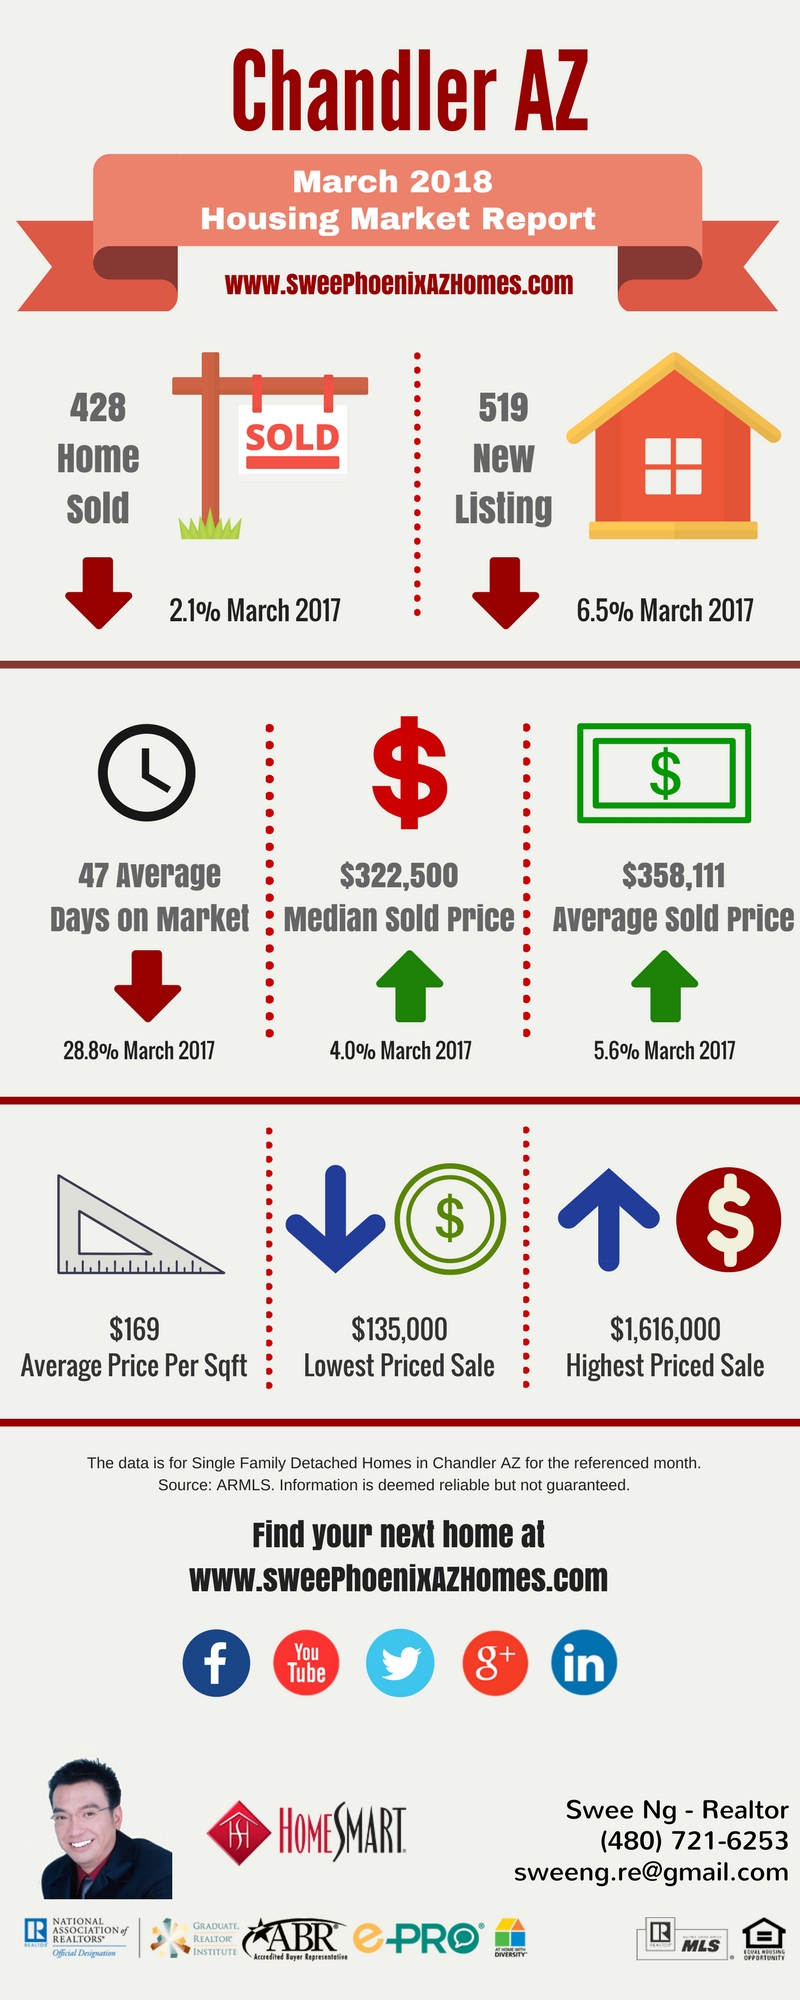 Chandler AZ Housing Market Update March 2018 by Swee Ng, House Value and Real Estate Listings